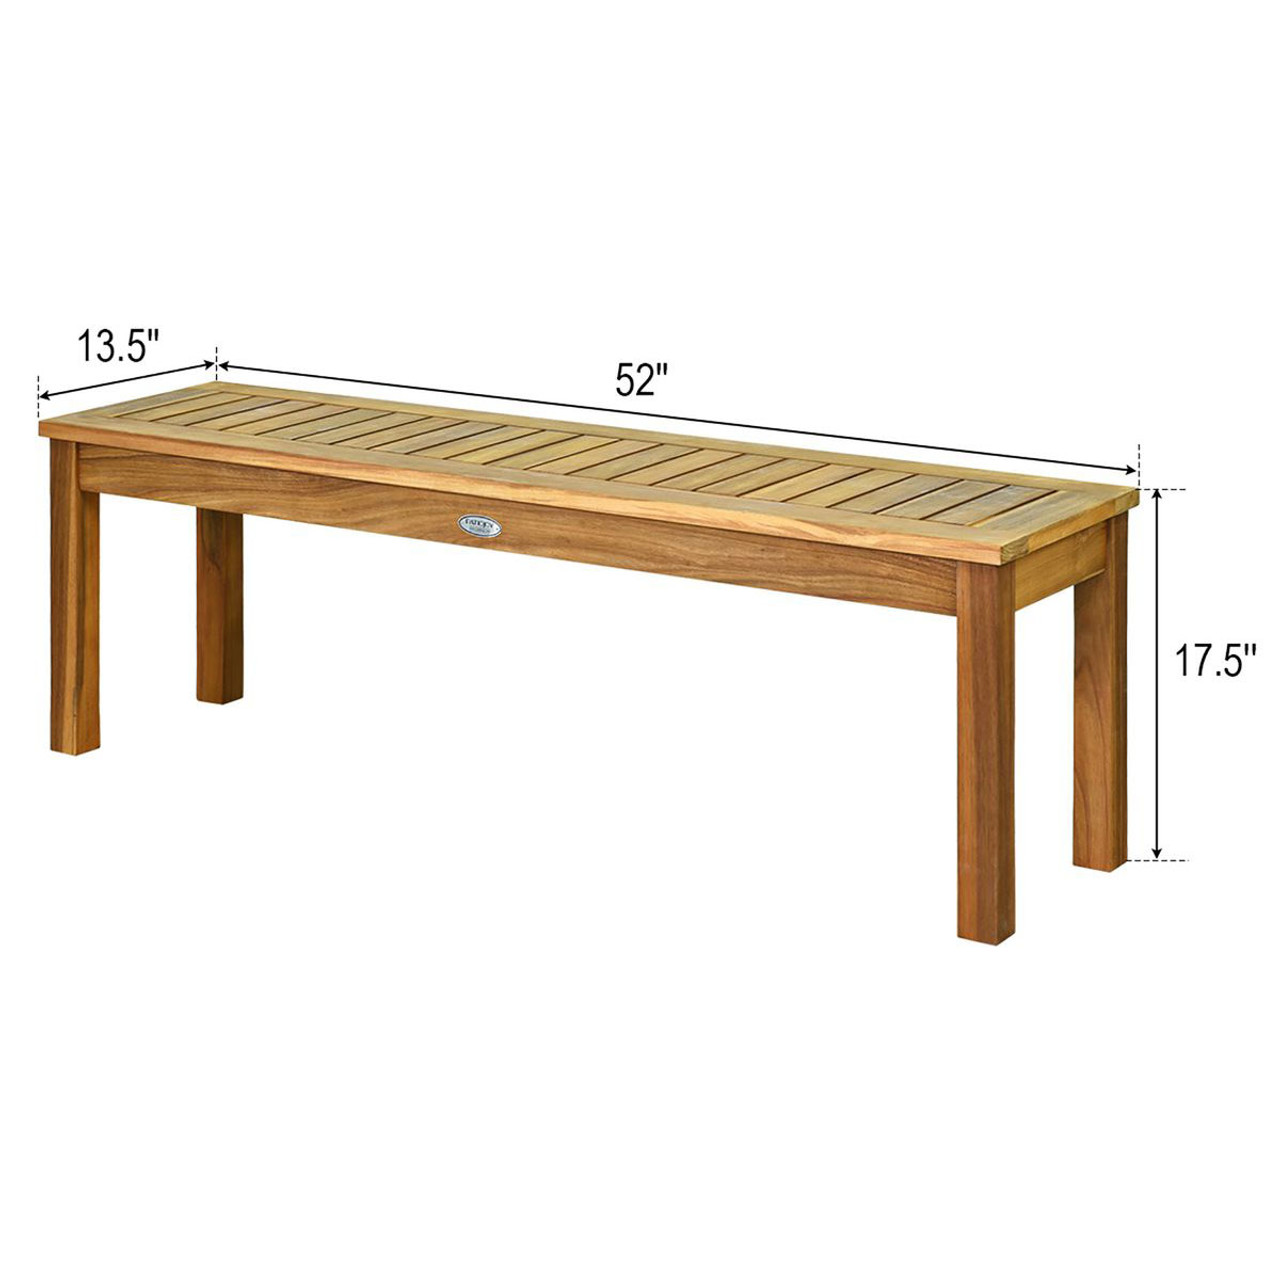 52-Inch Outdoor Acacia Wood Dining Bench Chair (1 or 2-Pack) product image